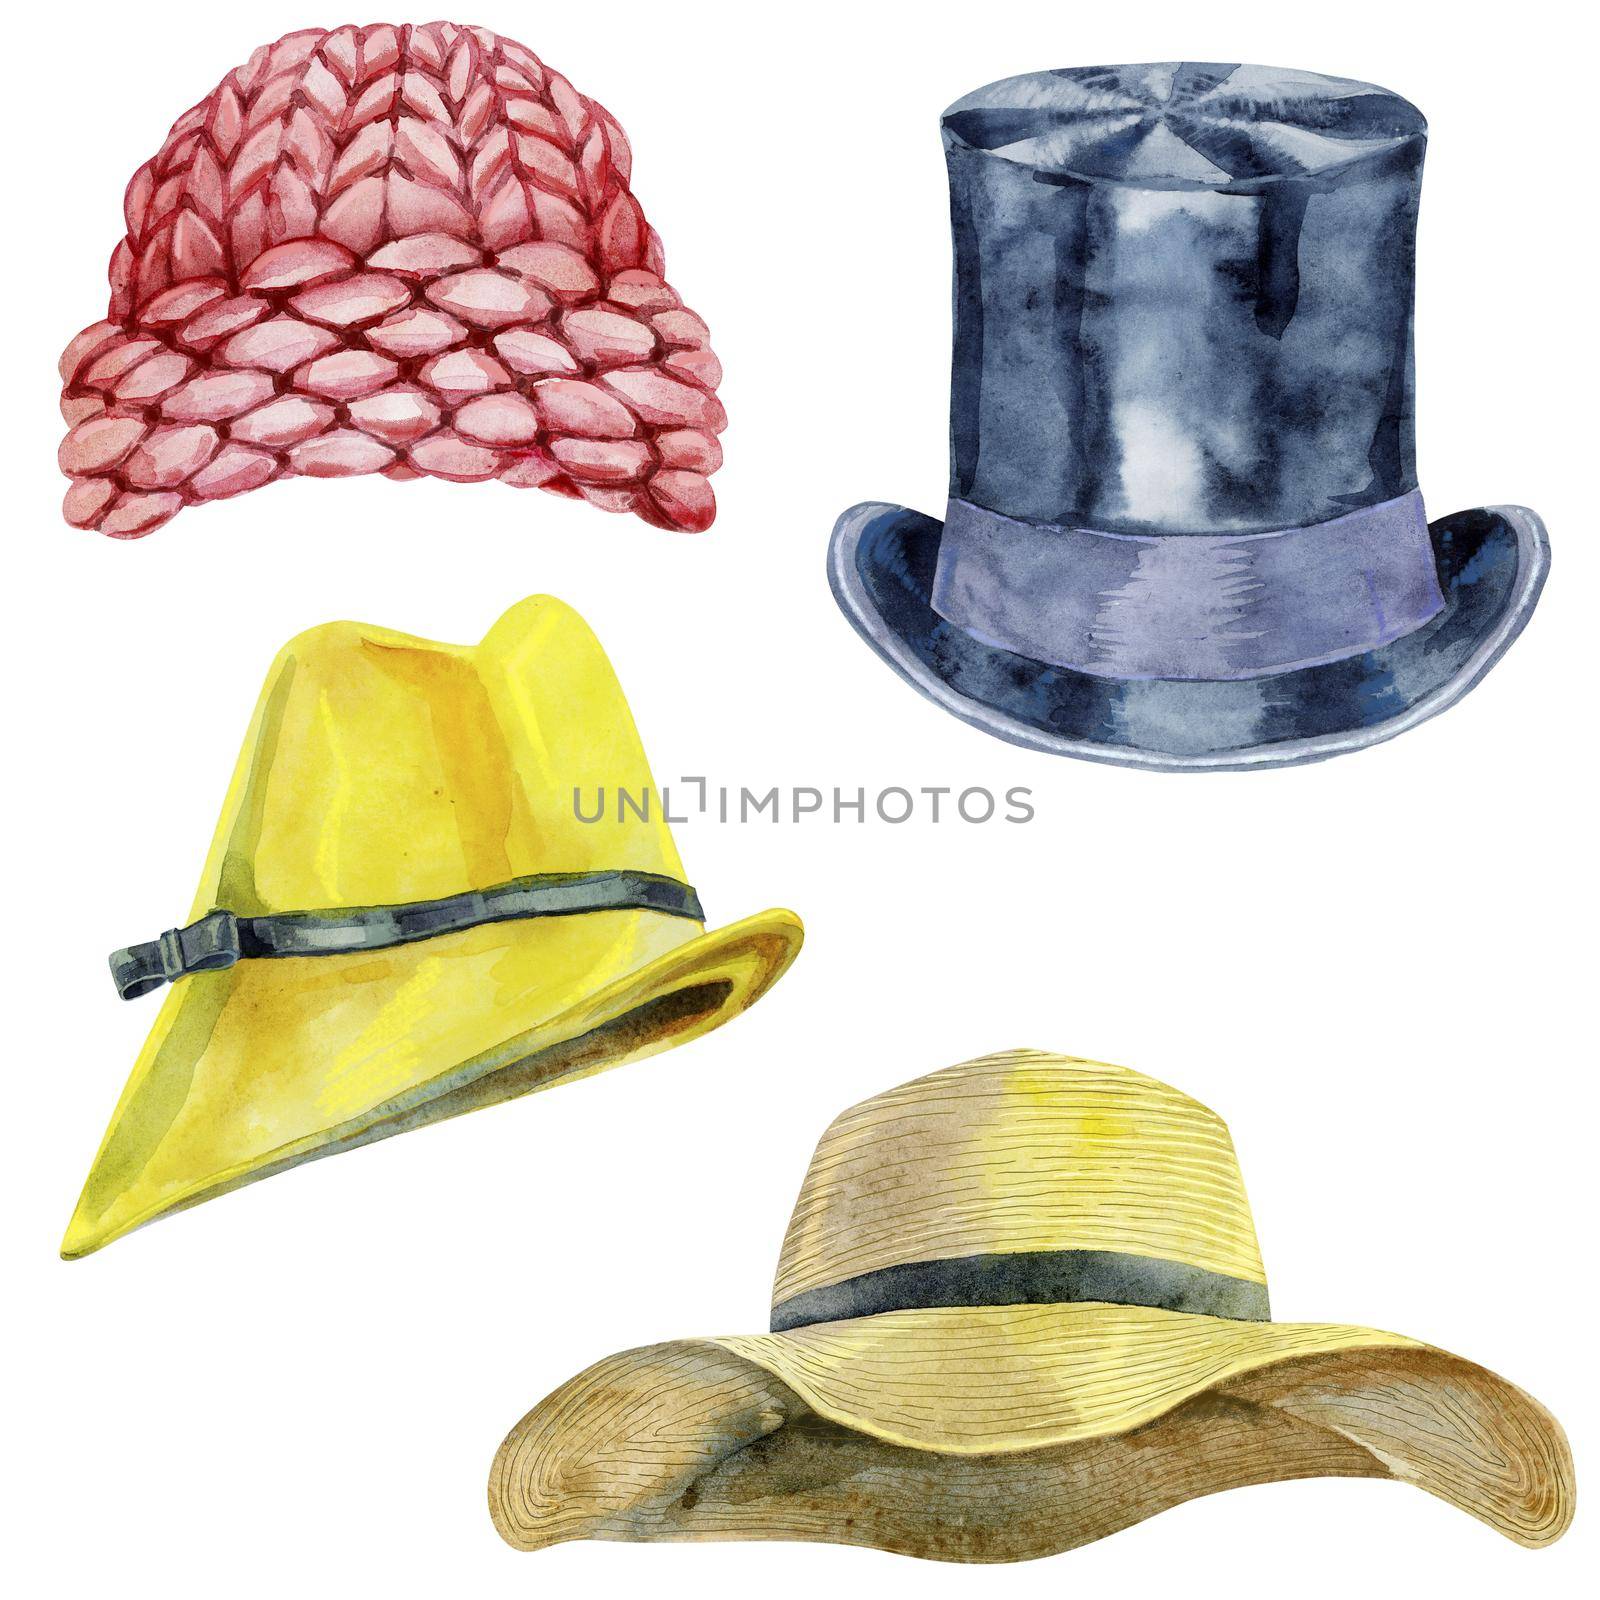 Pink knitted hat, top hat, yellow women's hat, straw summer hat. Watercolor drawing set